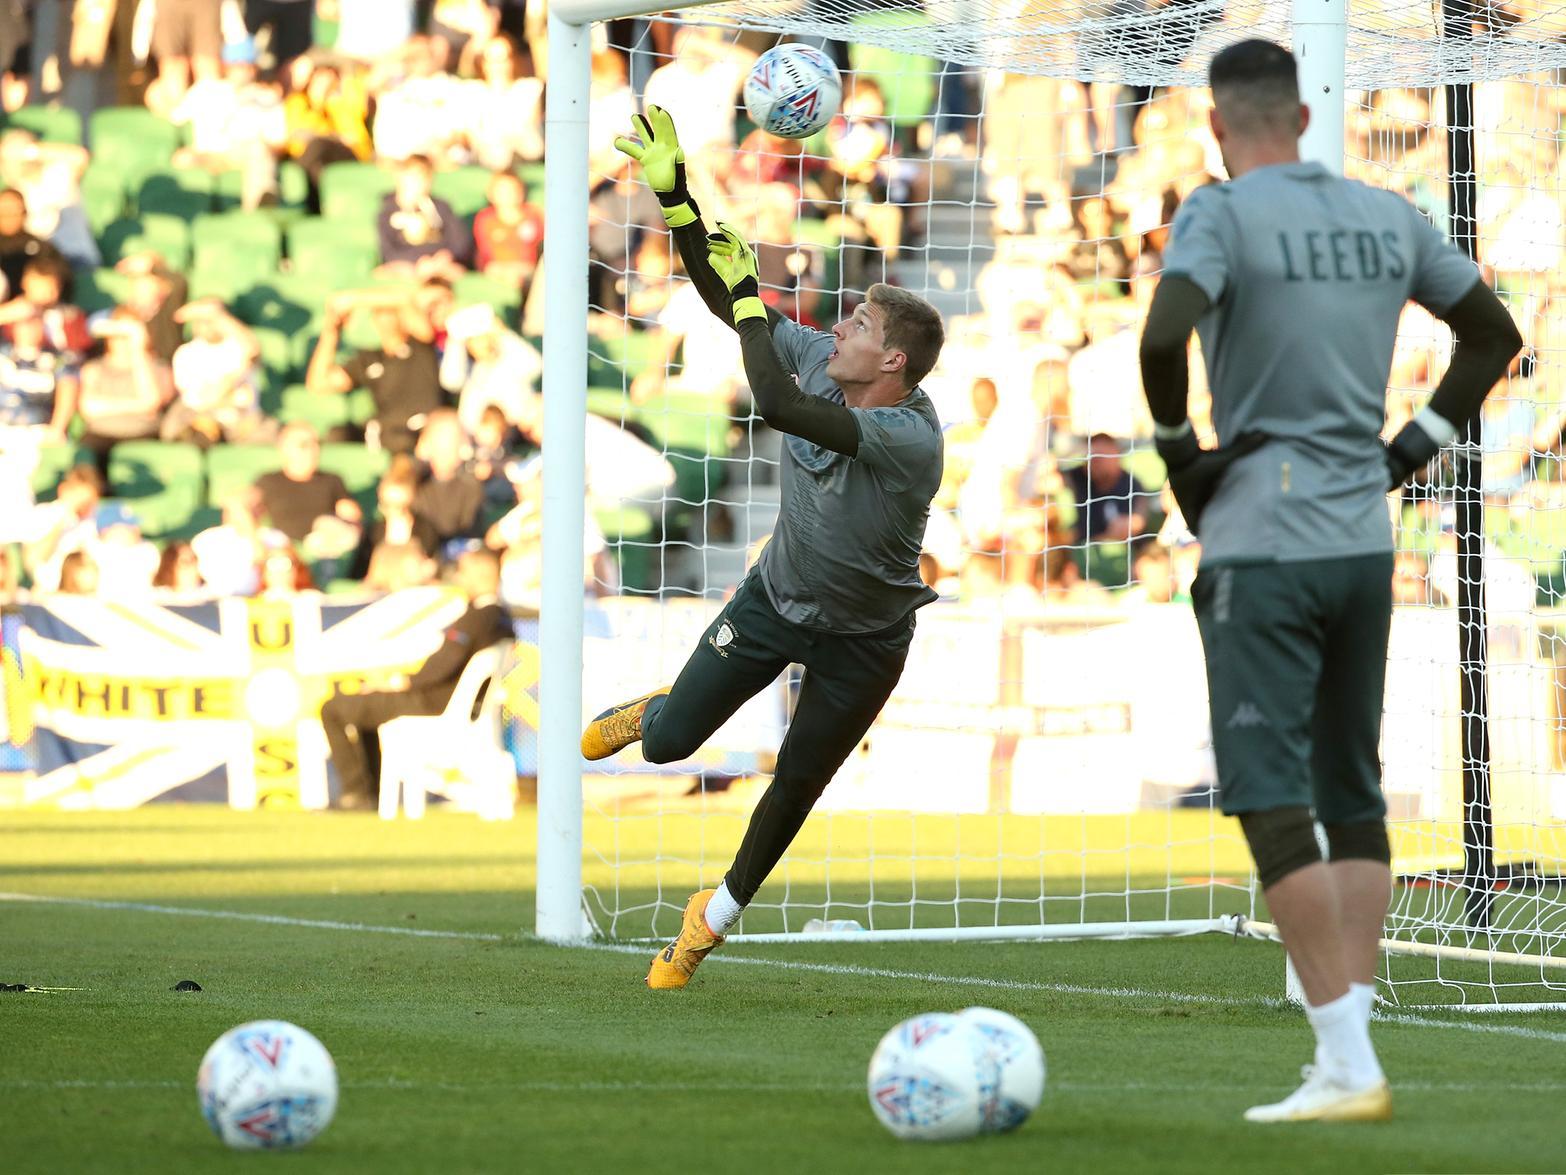 Rangers are understood to be stepping up their efforts to secure a new goalkeeper, with Leeds United's stopperKamil Miazek emerging as their current top target. (Goal)